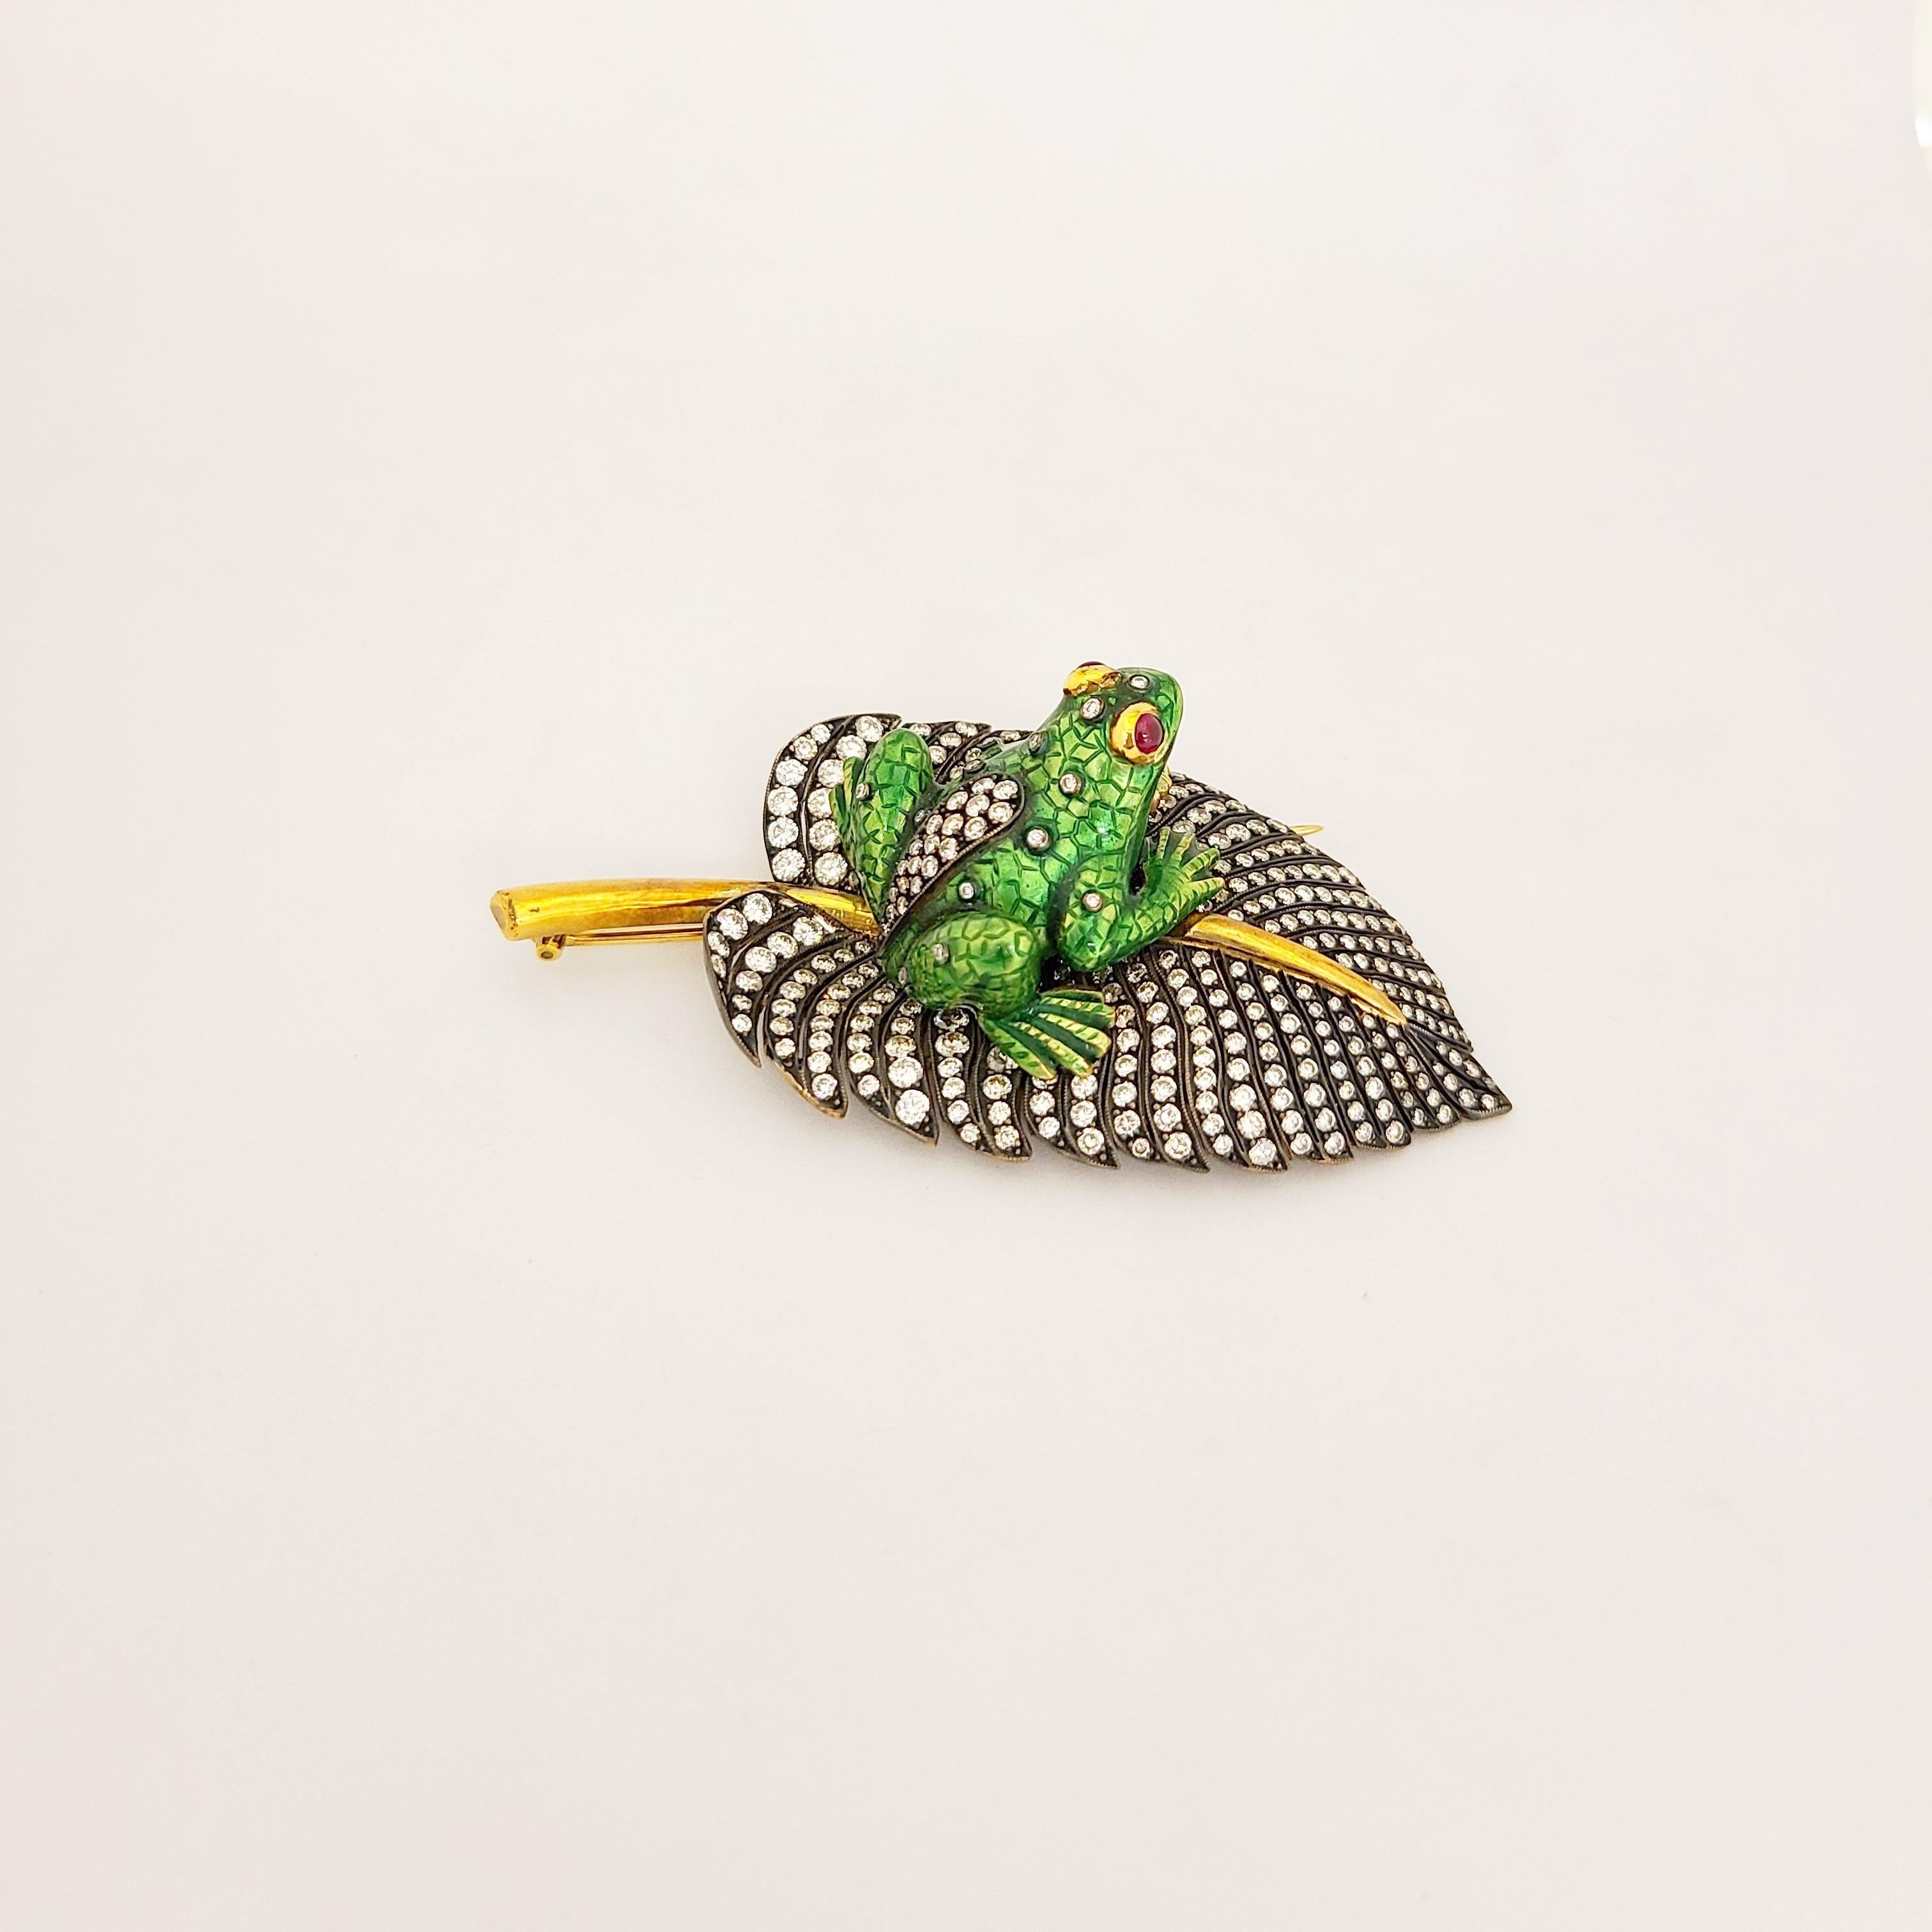 This exquisite brooch is crafted in 18 karat yellow gold and also blackened gold. The adorable frog is finished in green enamel. He is accented with diamonds and cabochon ruby eyes. He sits on a lily pad set with round brilliant diamonds. The beauty